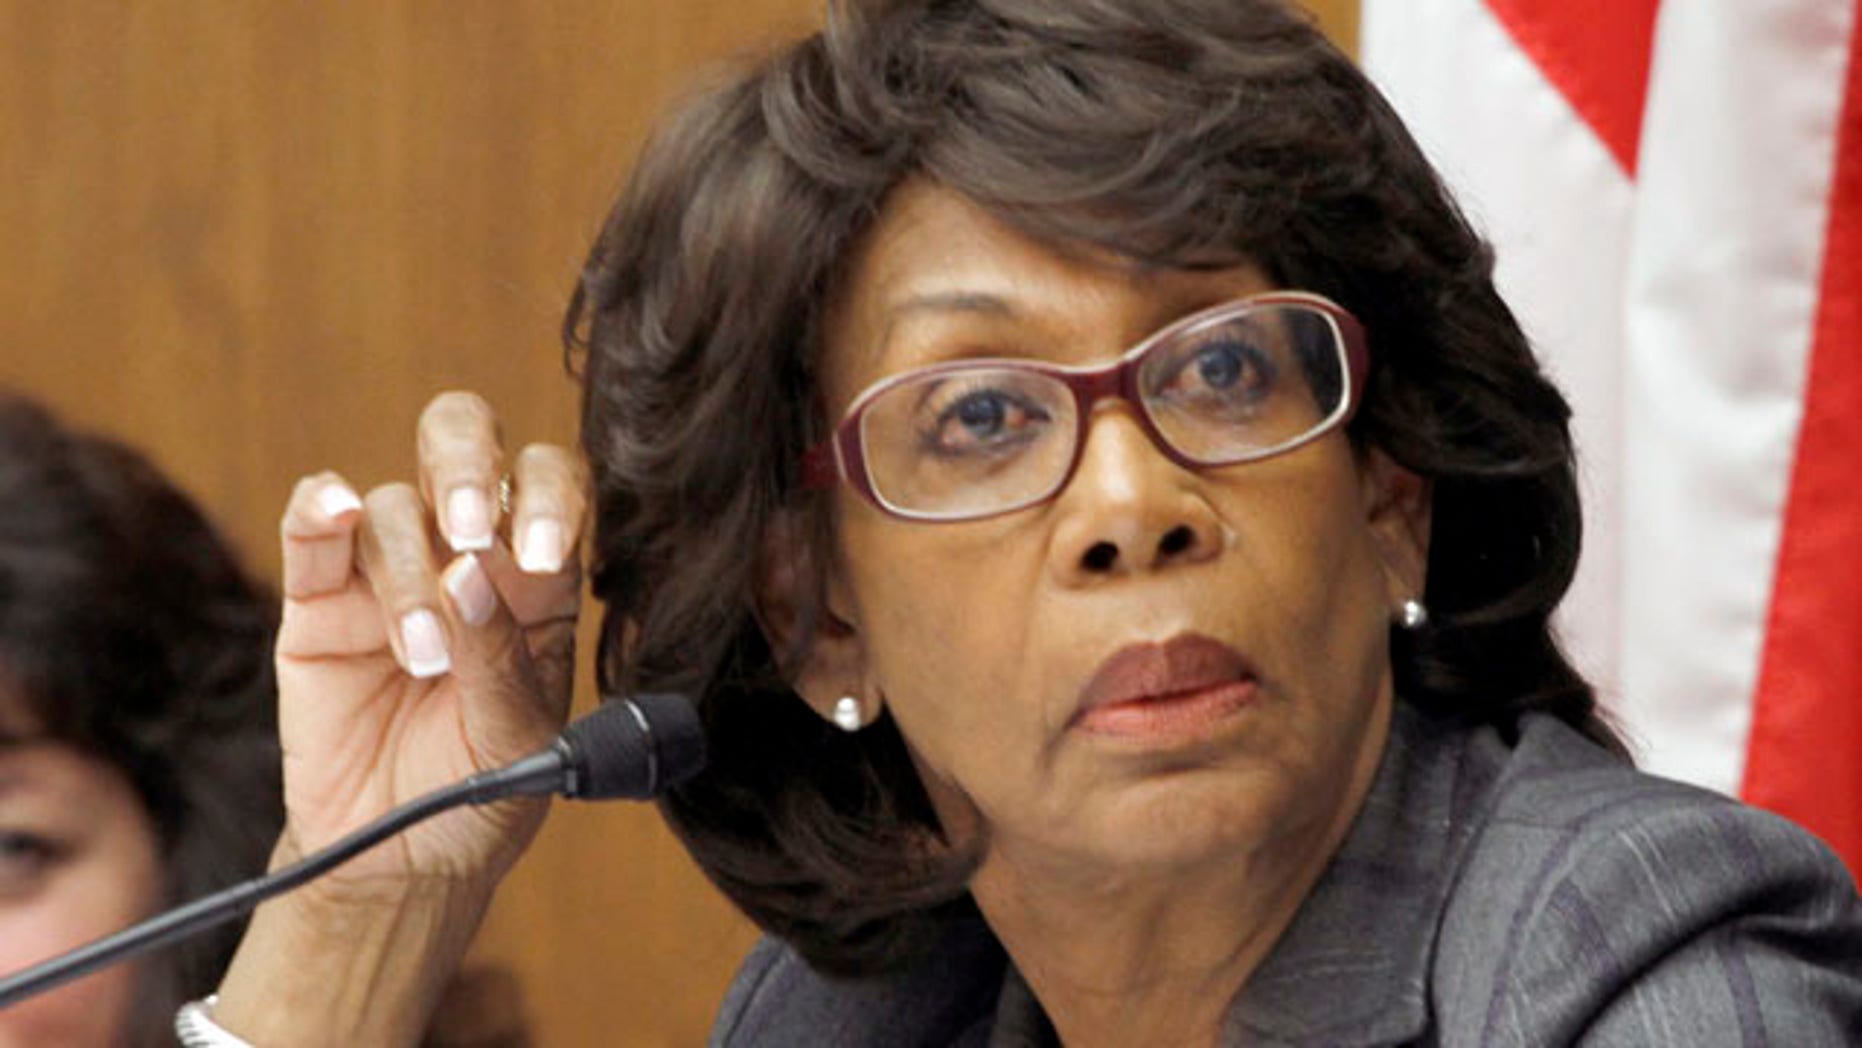 House Ethics Committee Cancels Waters Case After New Documents Emerges Fox News